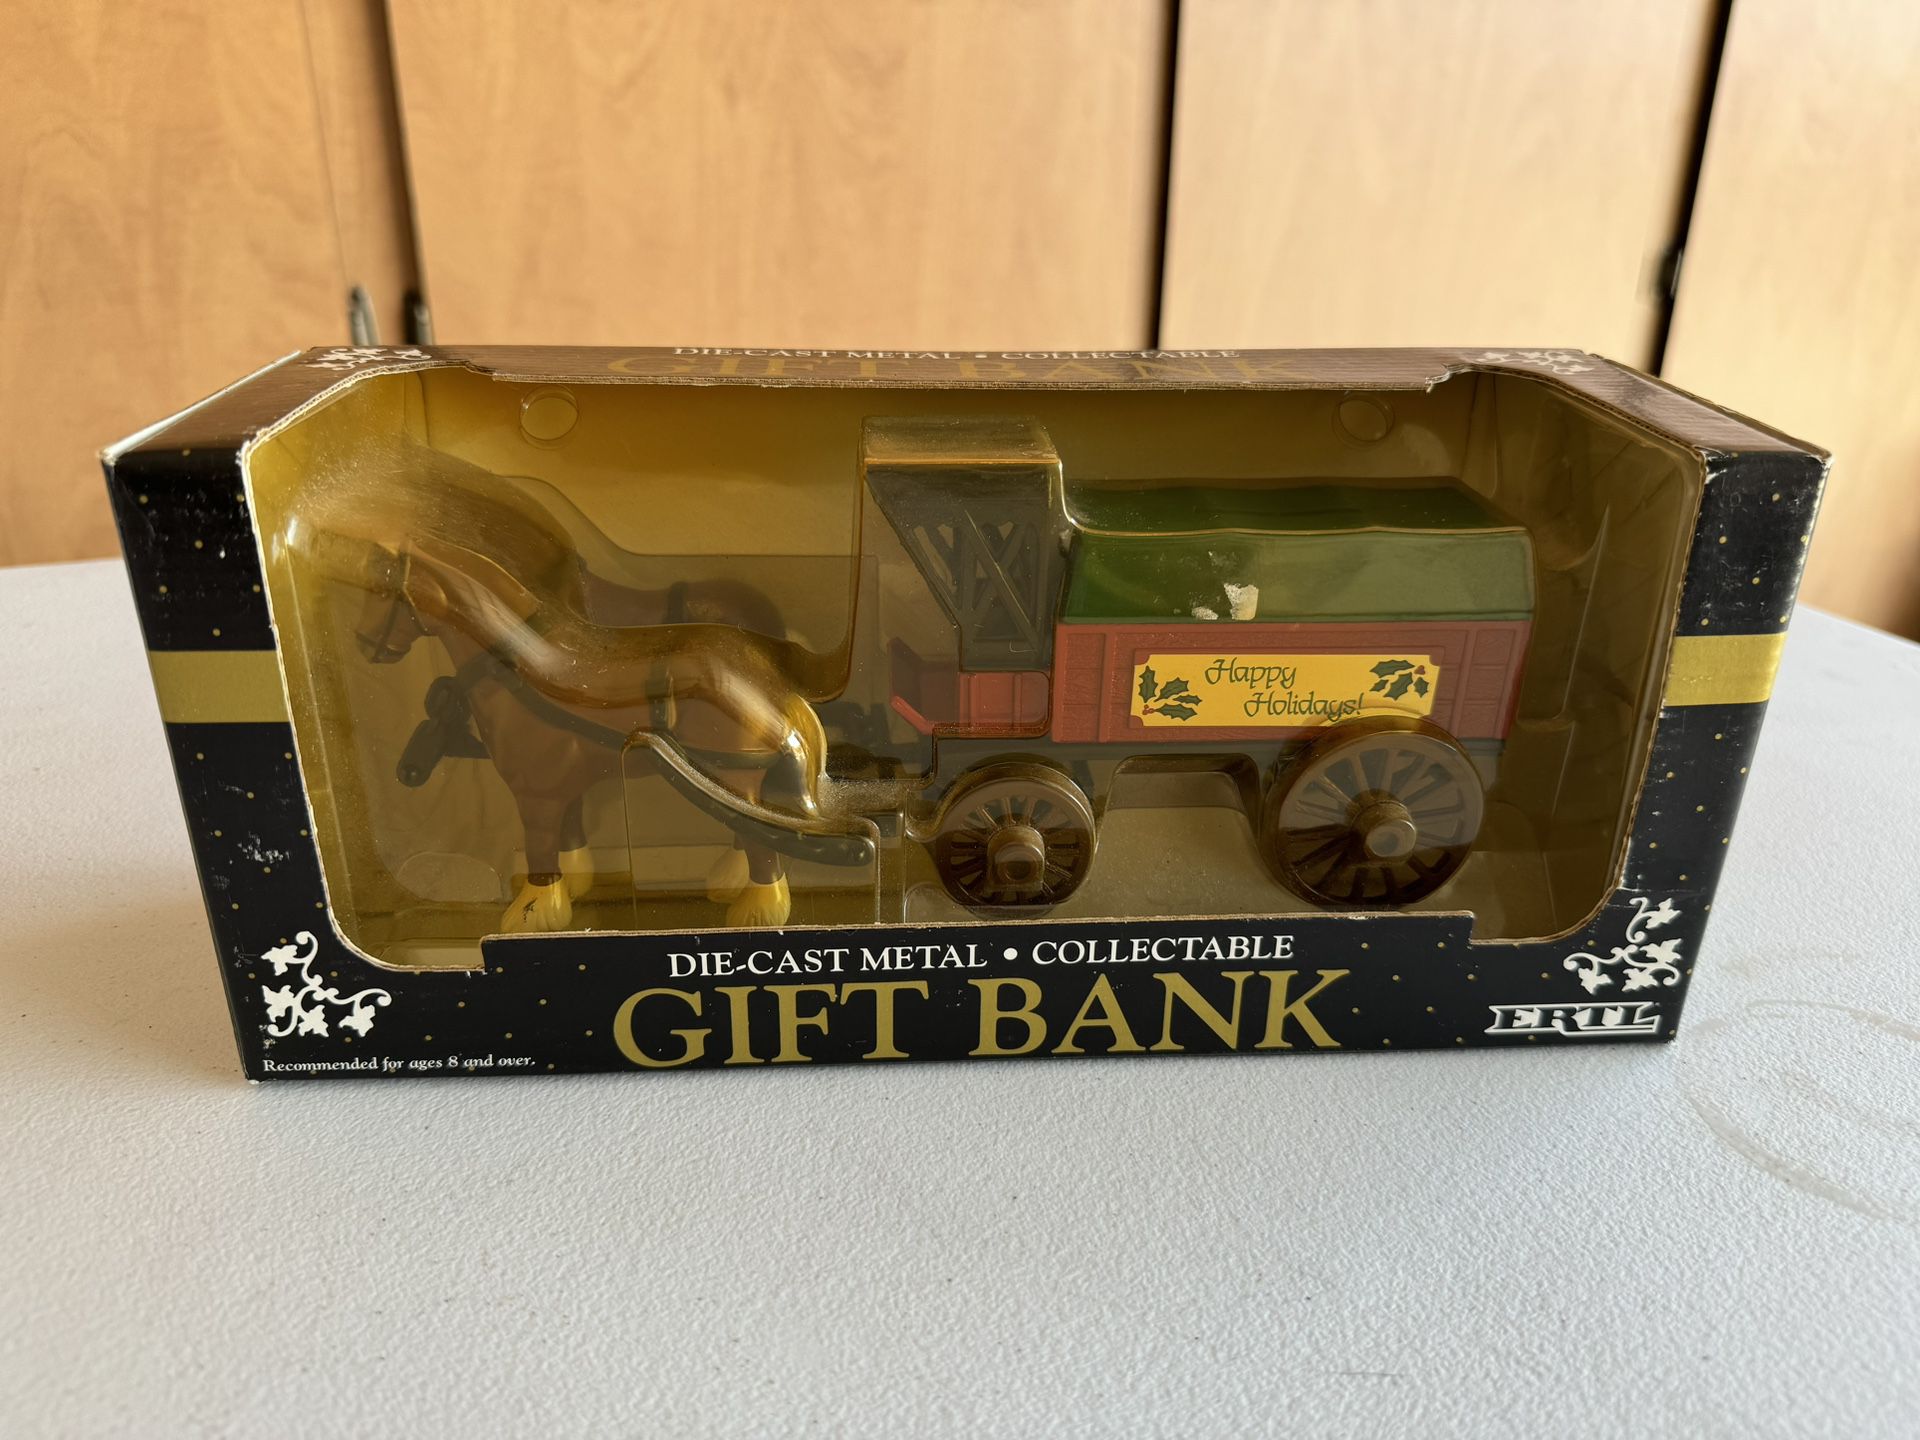 1992 Ertl Die Cast Metal Collectible Gift Bank Happy Holidays Horse and Carriage